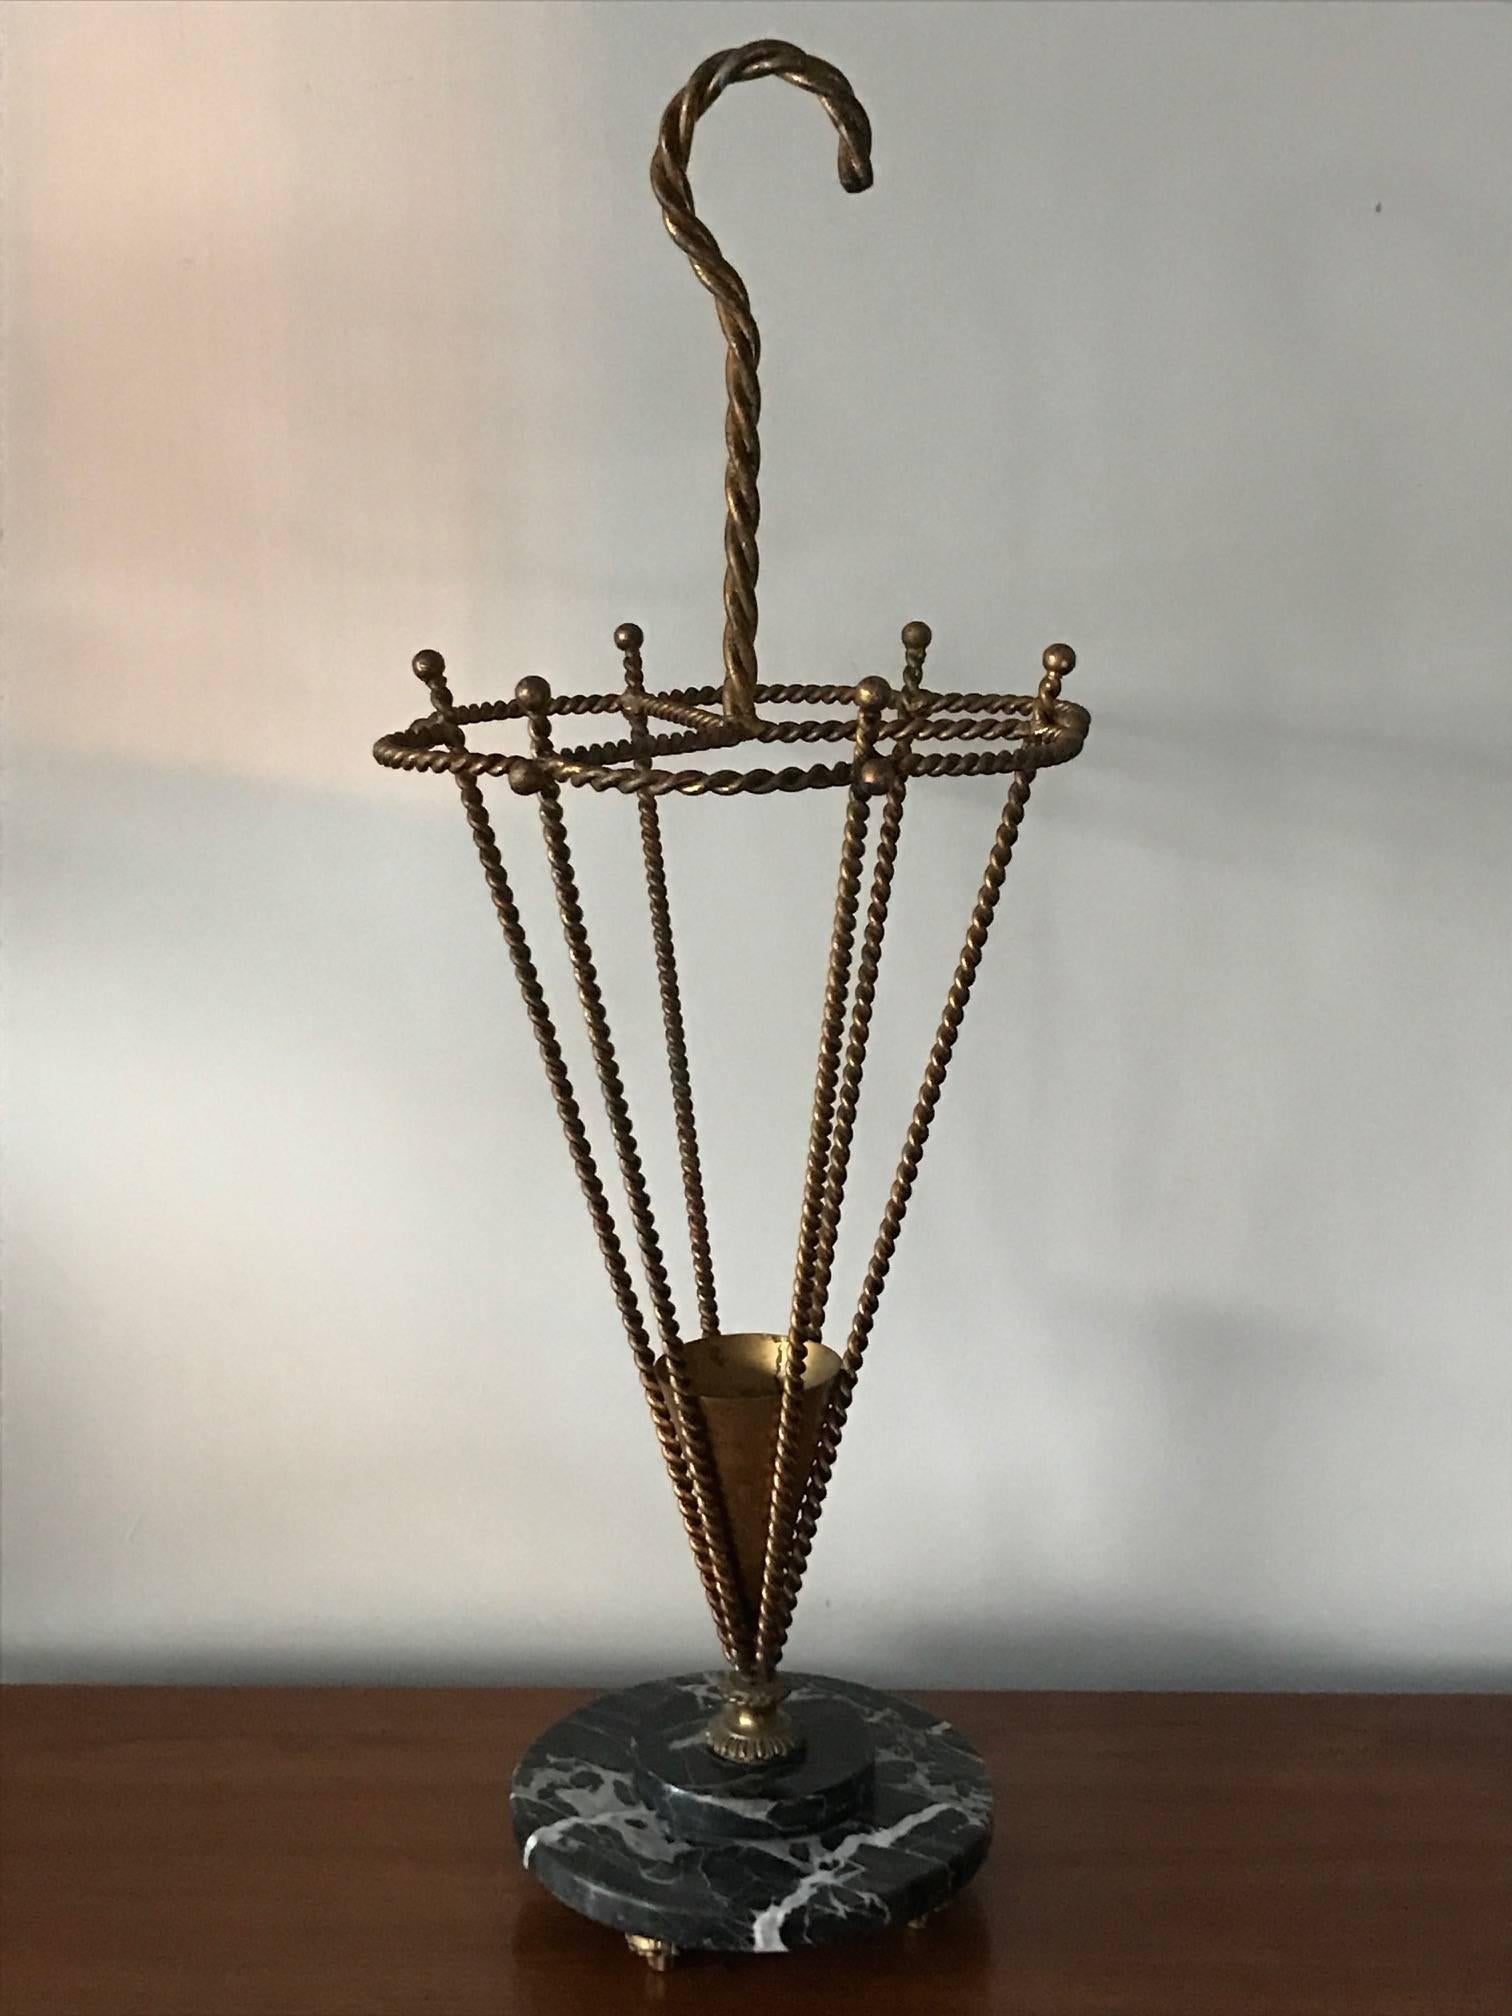 An elegant Italian umbrella stand with marble base. Gilt metal. Heavy and well-made, circa 1950s.